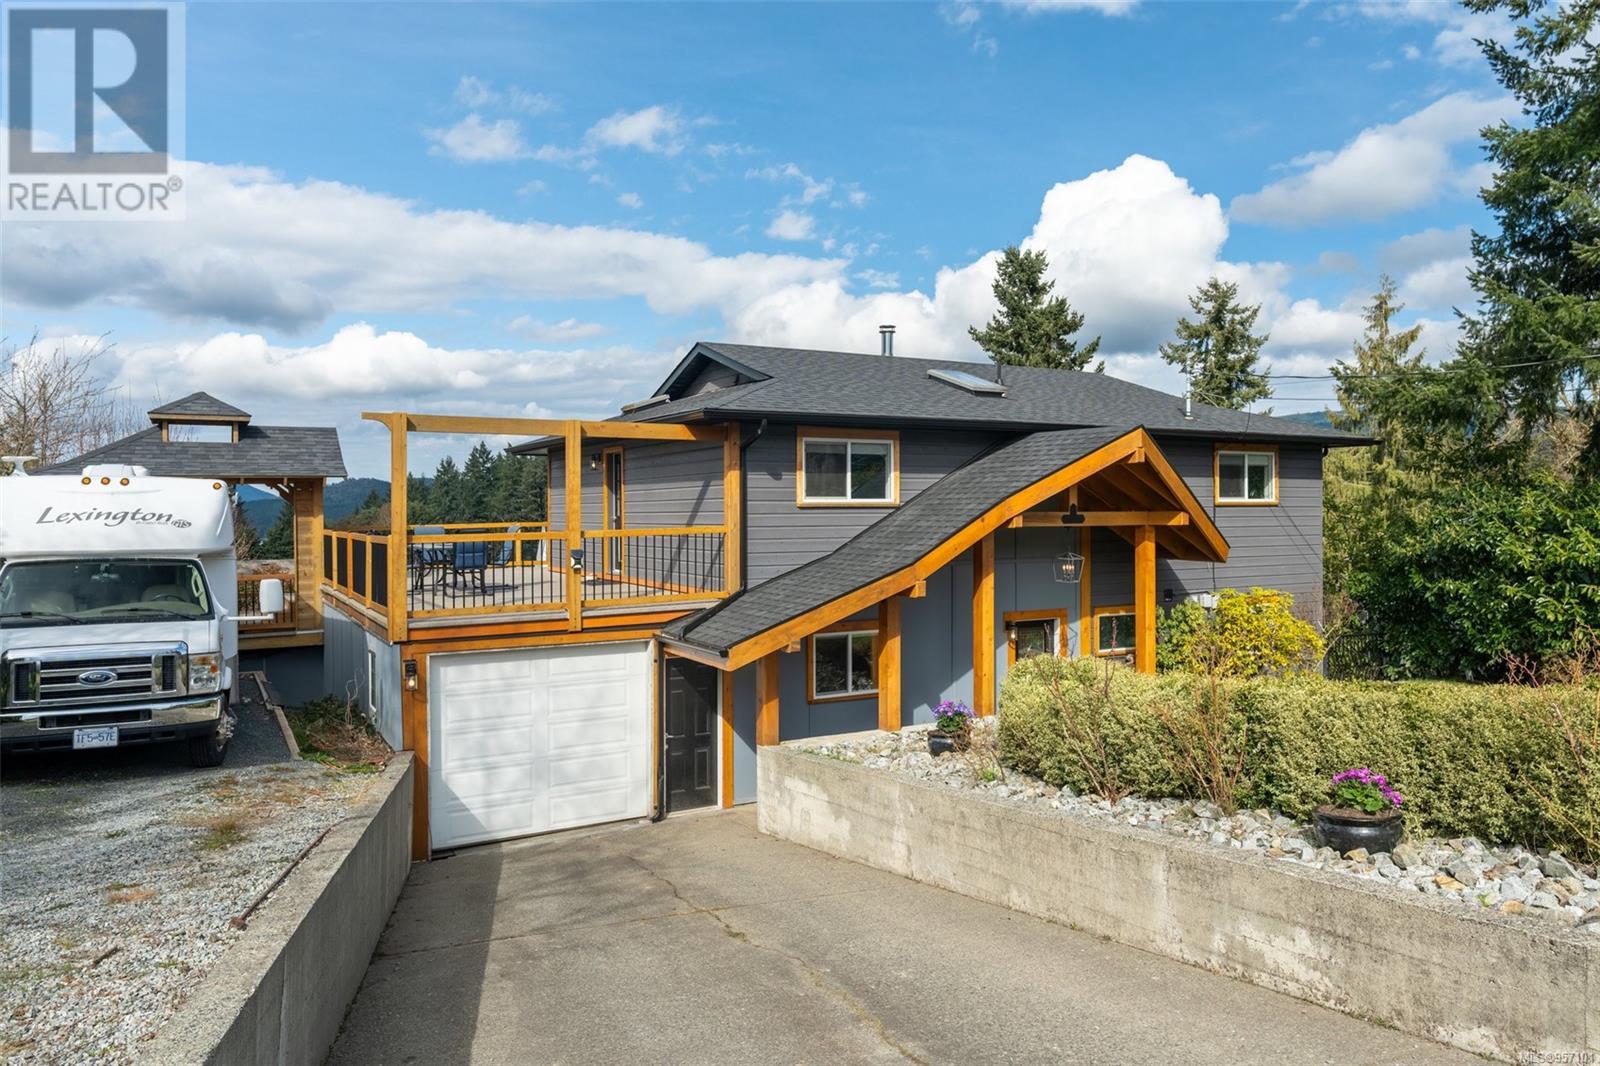 1323 Cherry Point Rd, Cowichan Bay